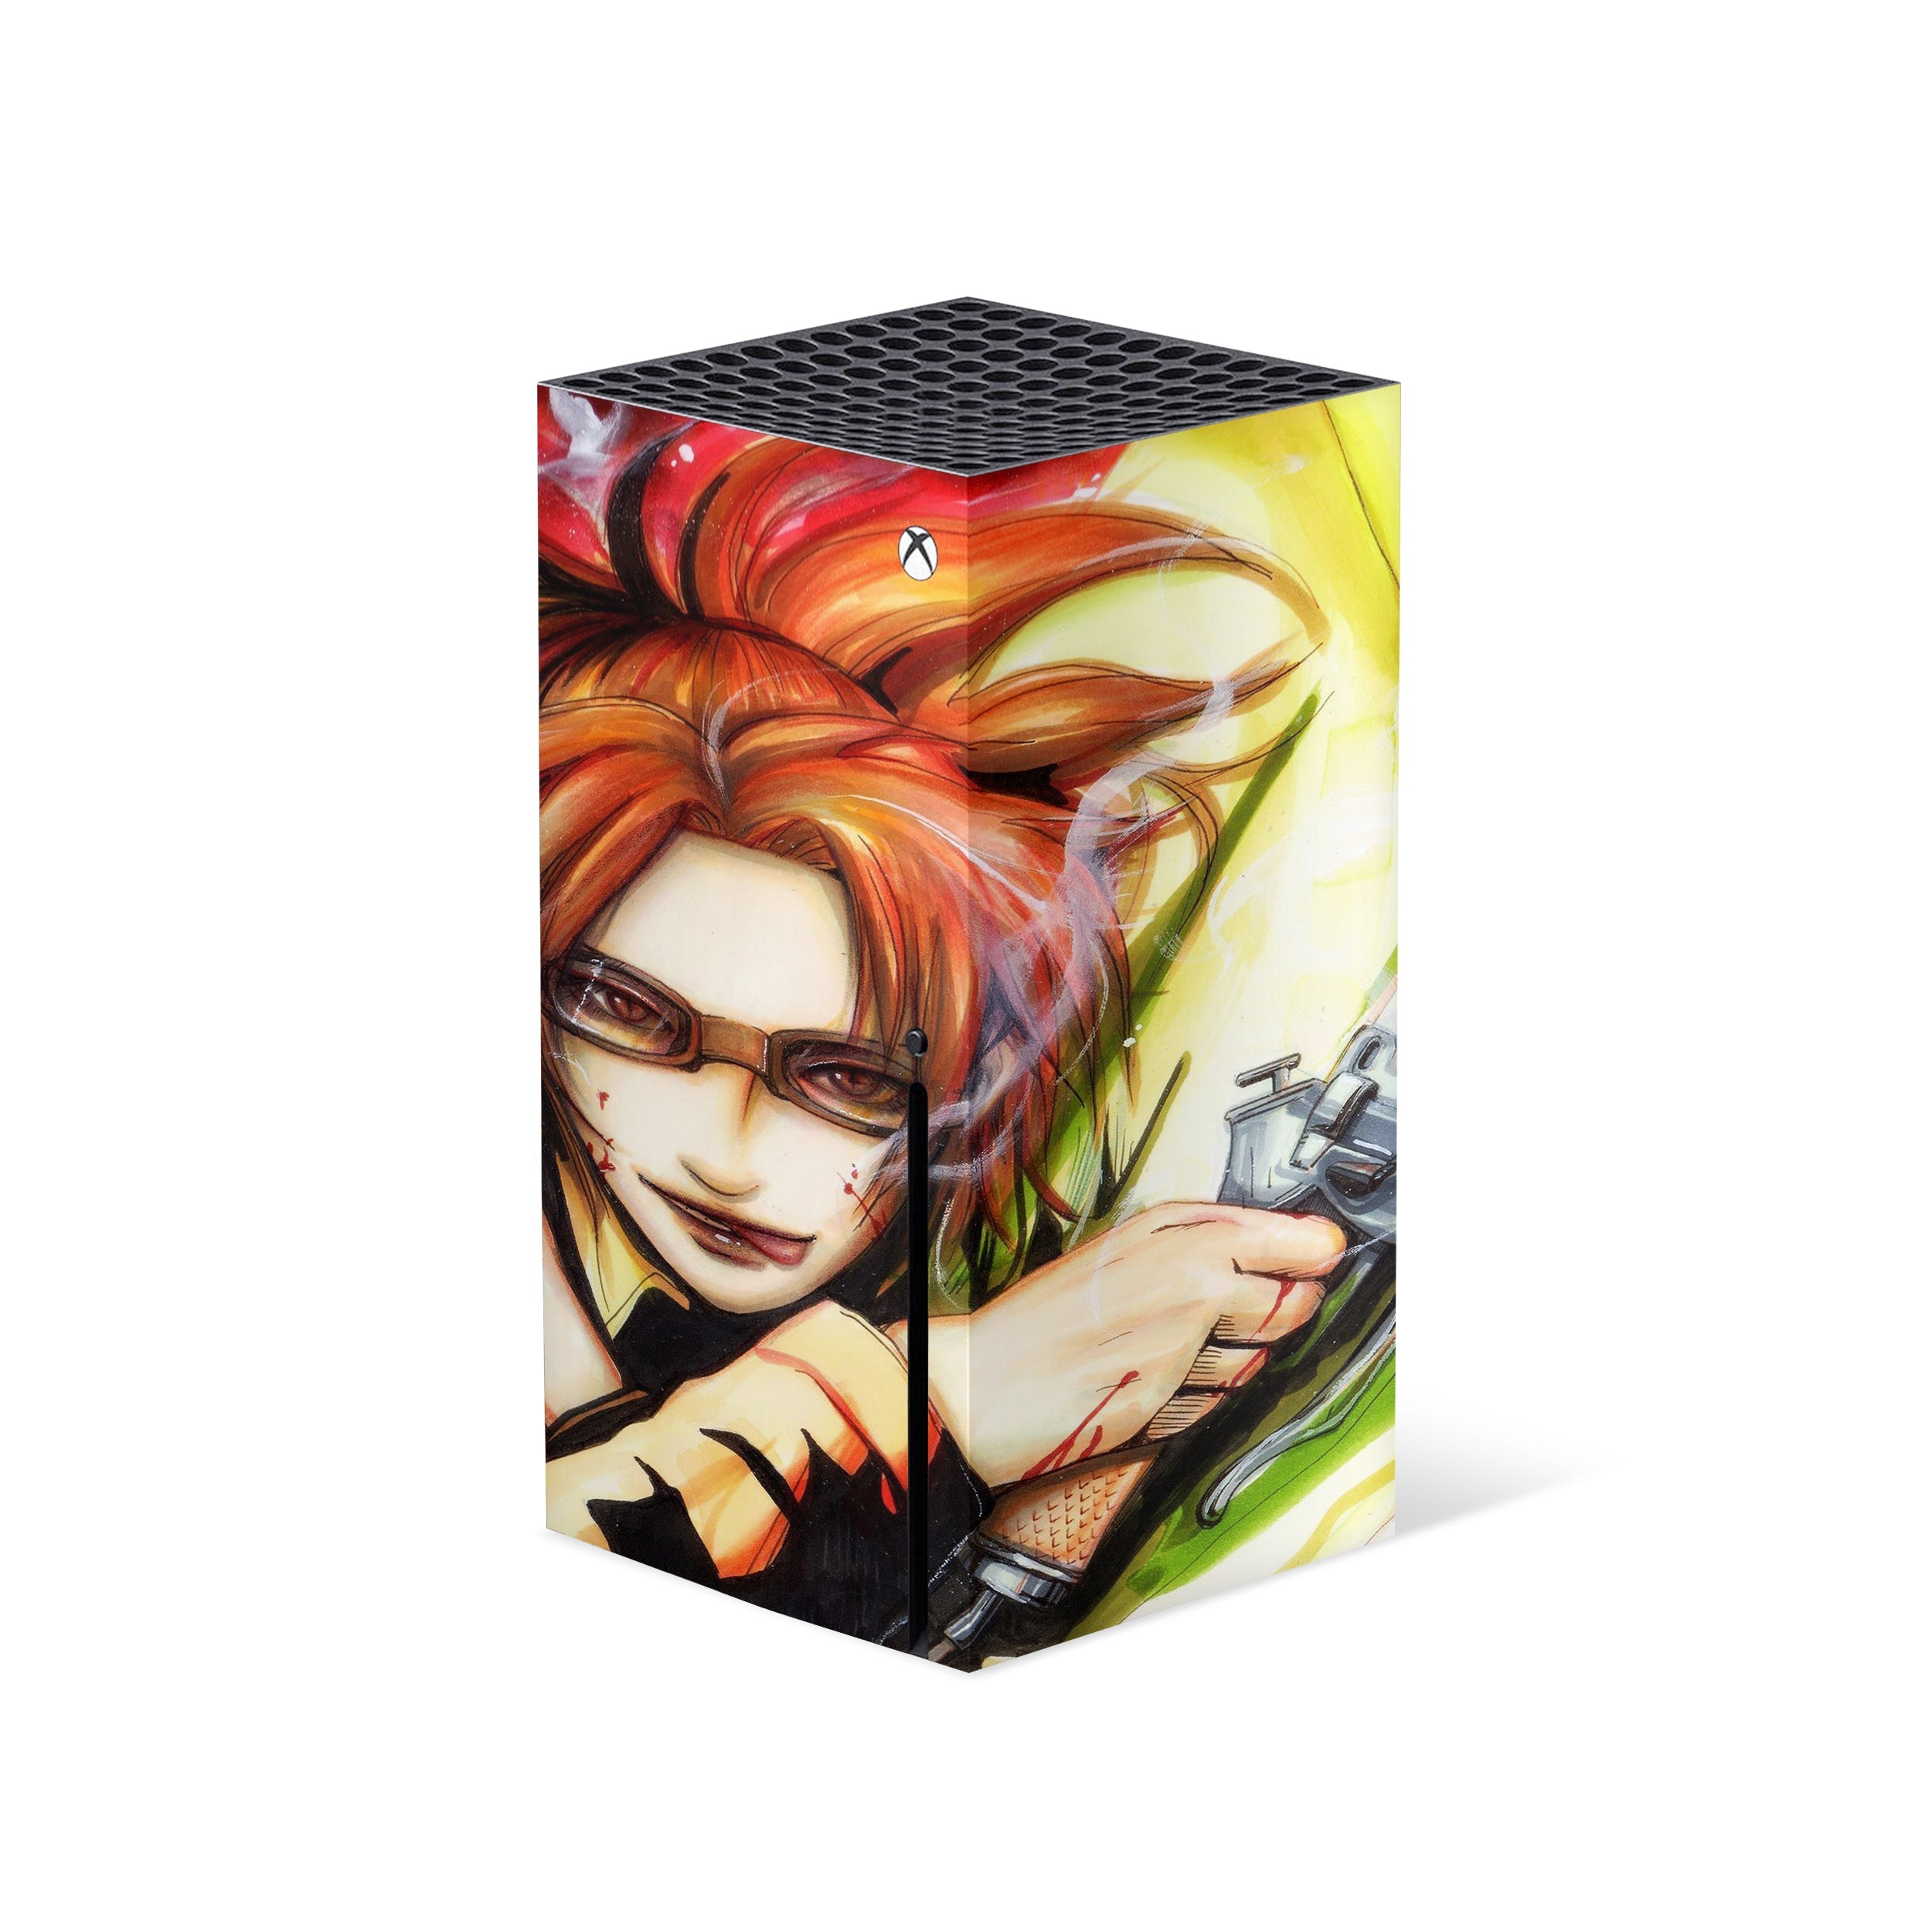 A video game skin featuring a Attack On Titan Hange Zoe design for the Xbox Series X.